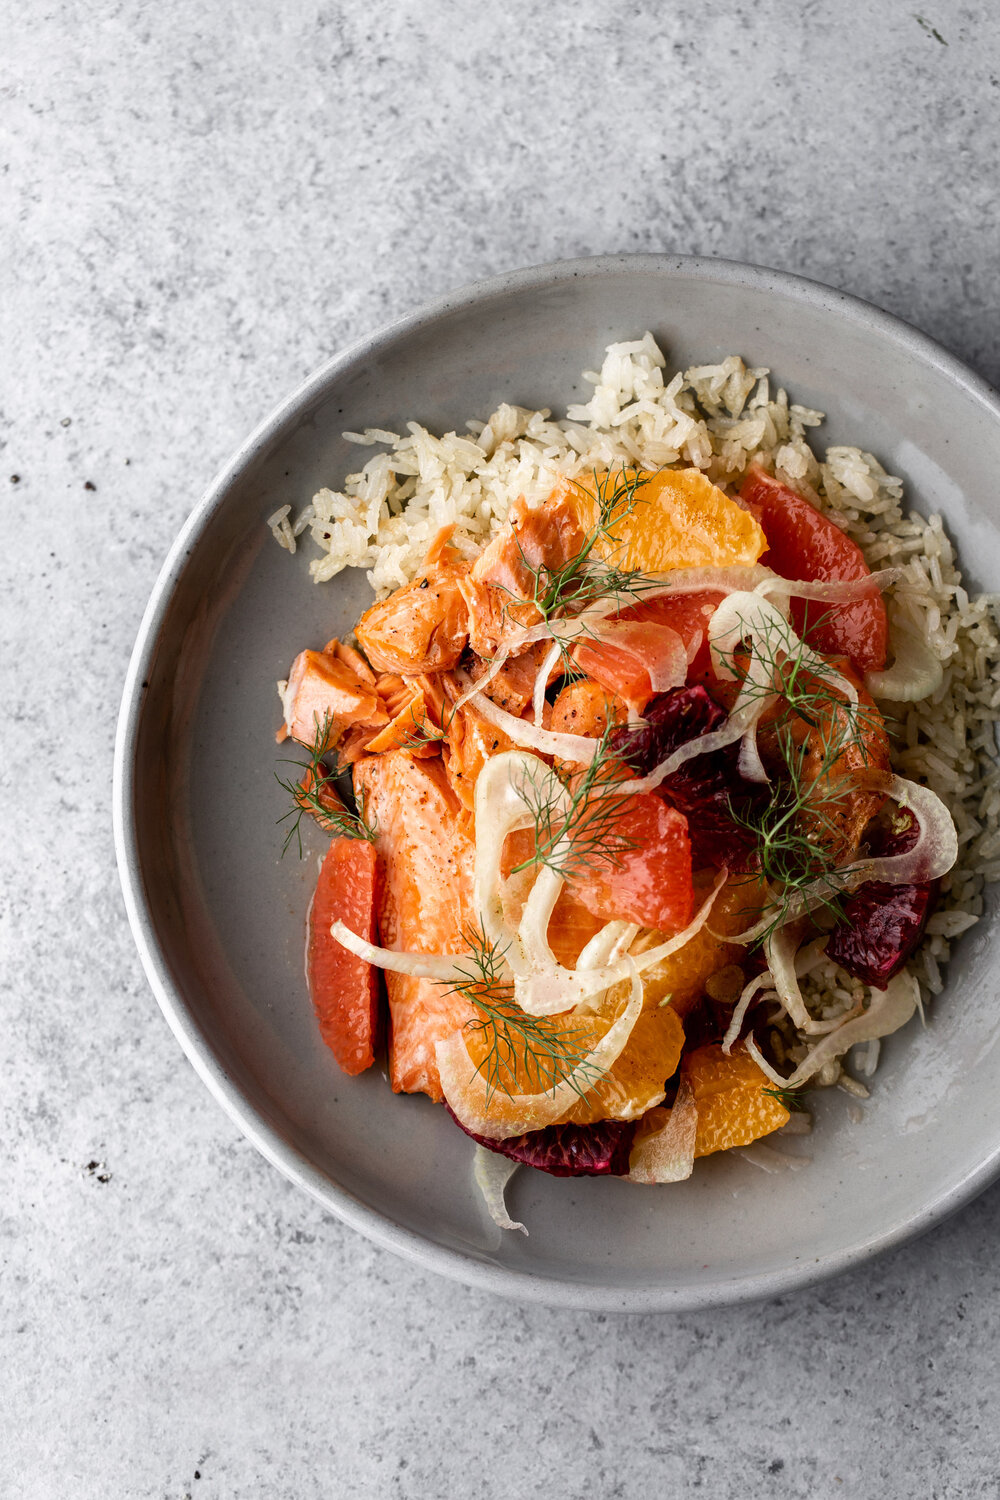 Roasted Salmon with Winter Citrus Salad and Brown Butter over Crispy Rice